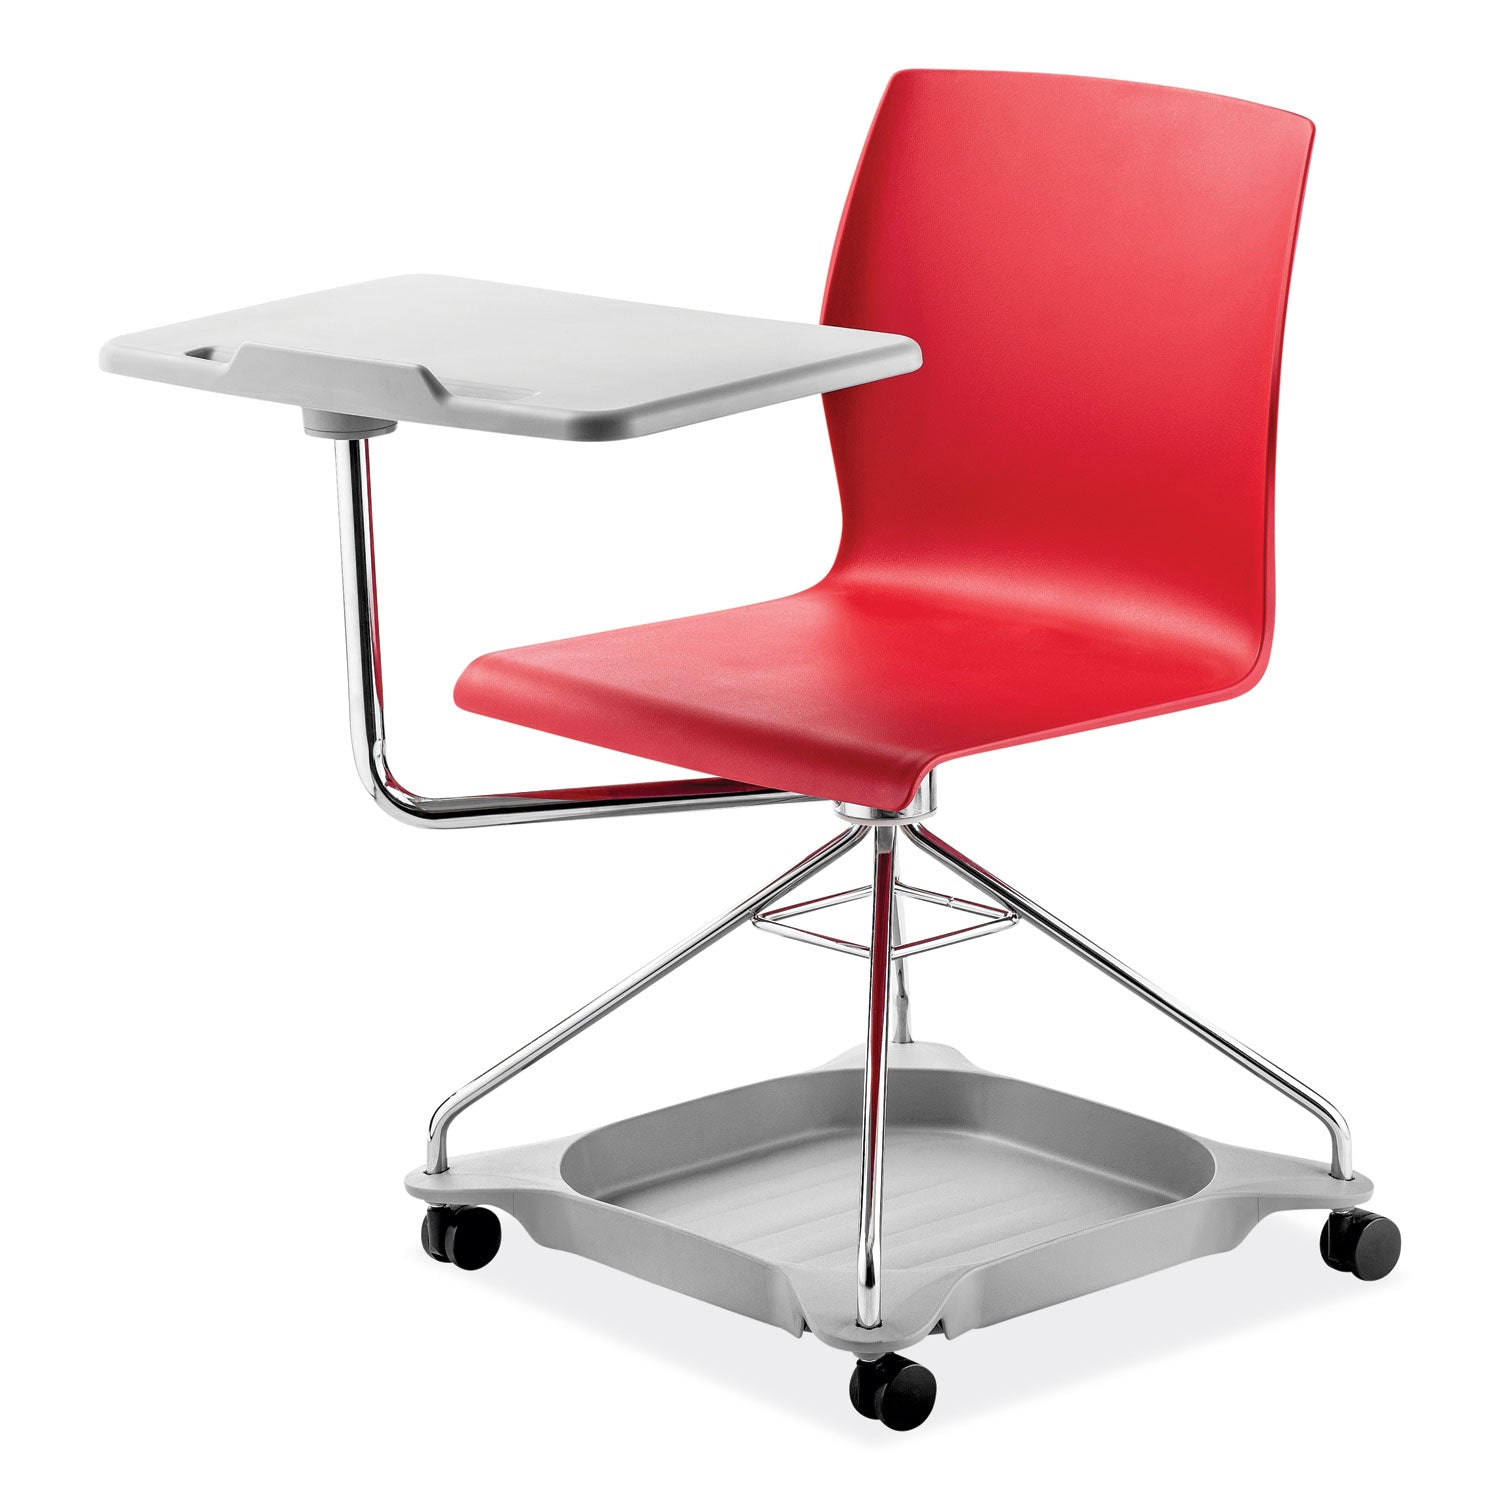 cogo-mobile-tablet-chair-supports-up-to-440-lb-1875-seat-height-red-seat-back-chrome-frame-ships-in-1-3-business-days_npscogo40 - 1